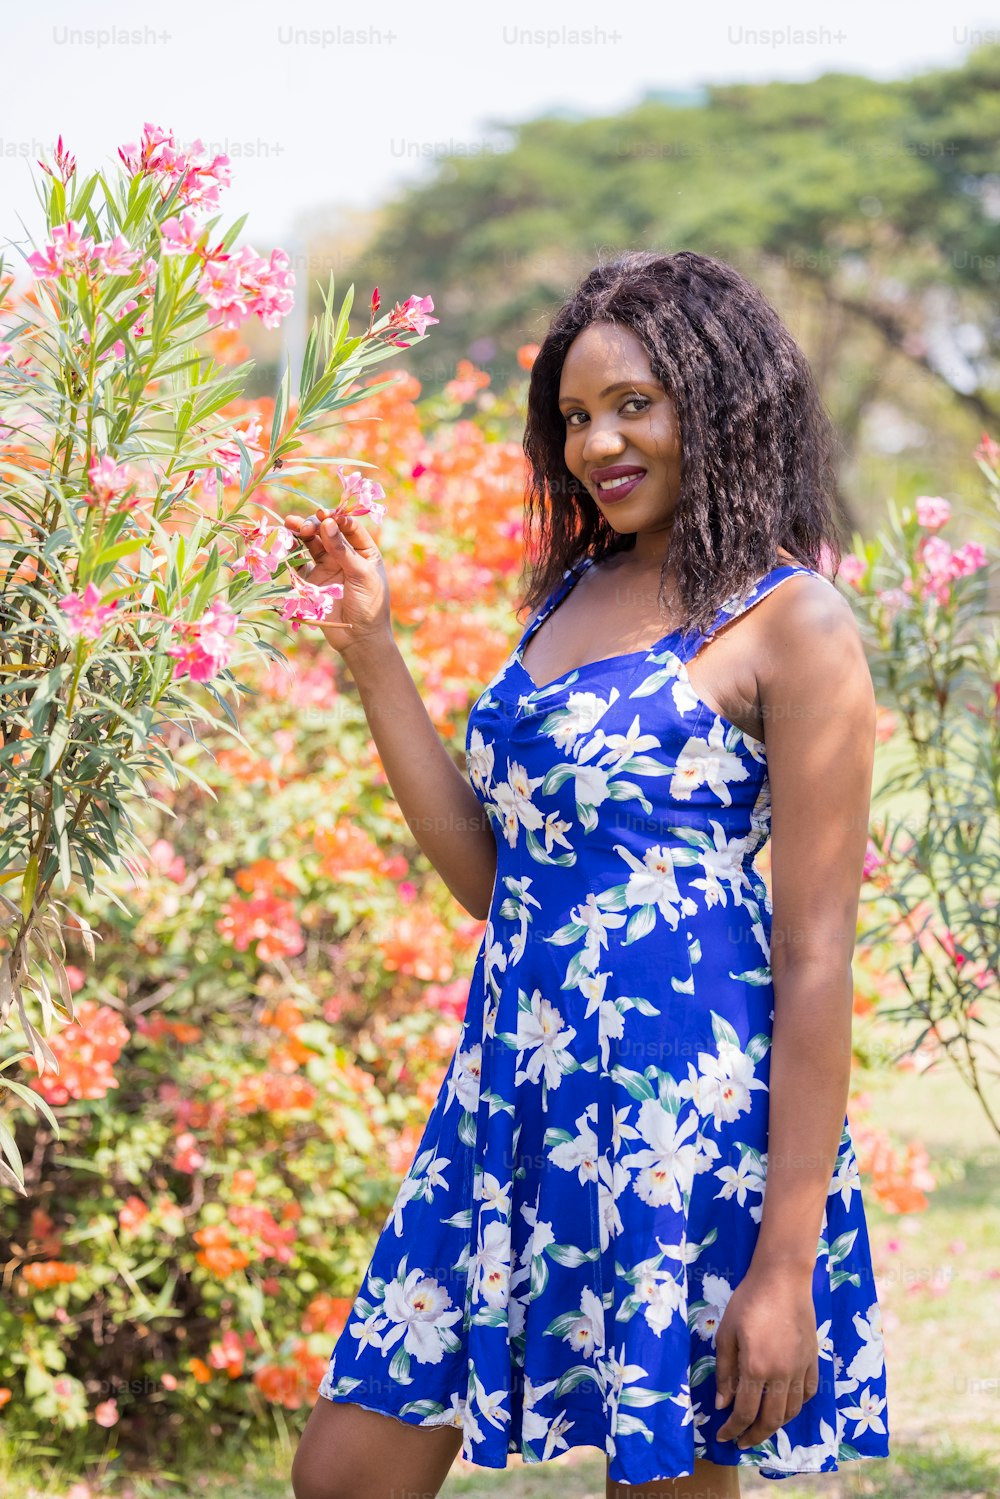 Content Black Woman Smelling Flowers in Park.